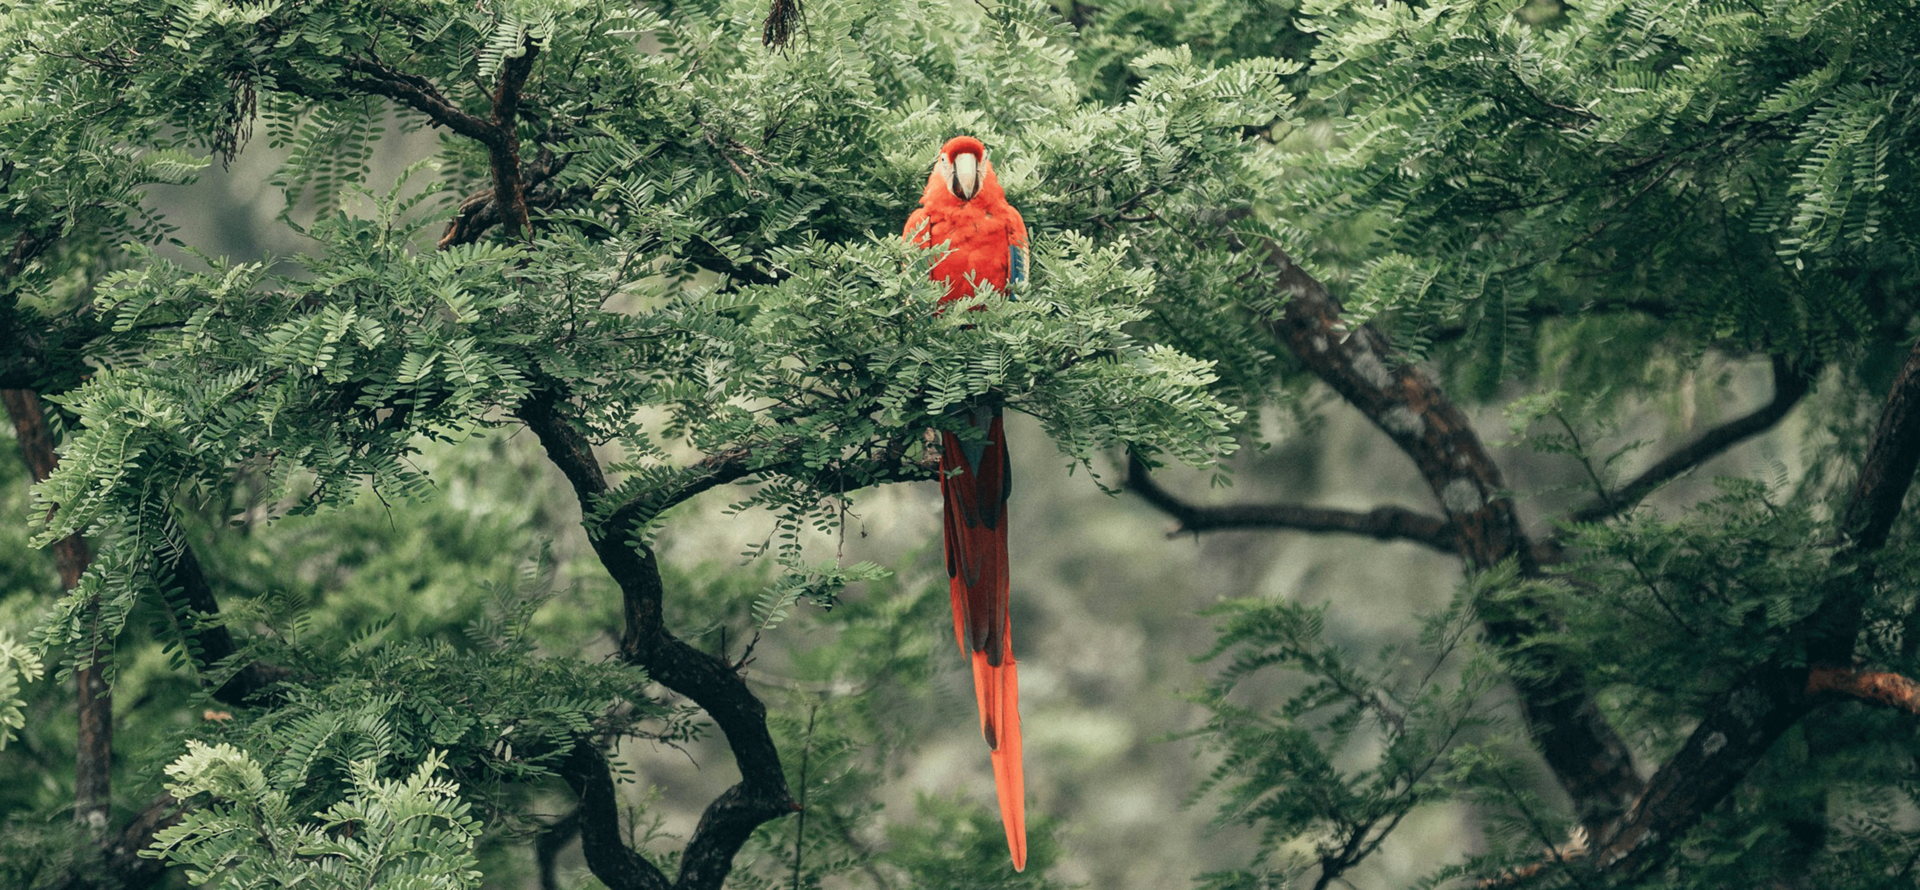 A red parrot in the jungle.